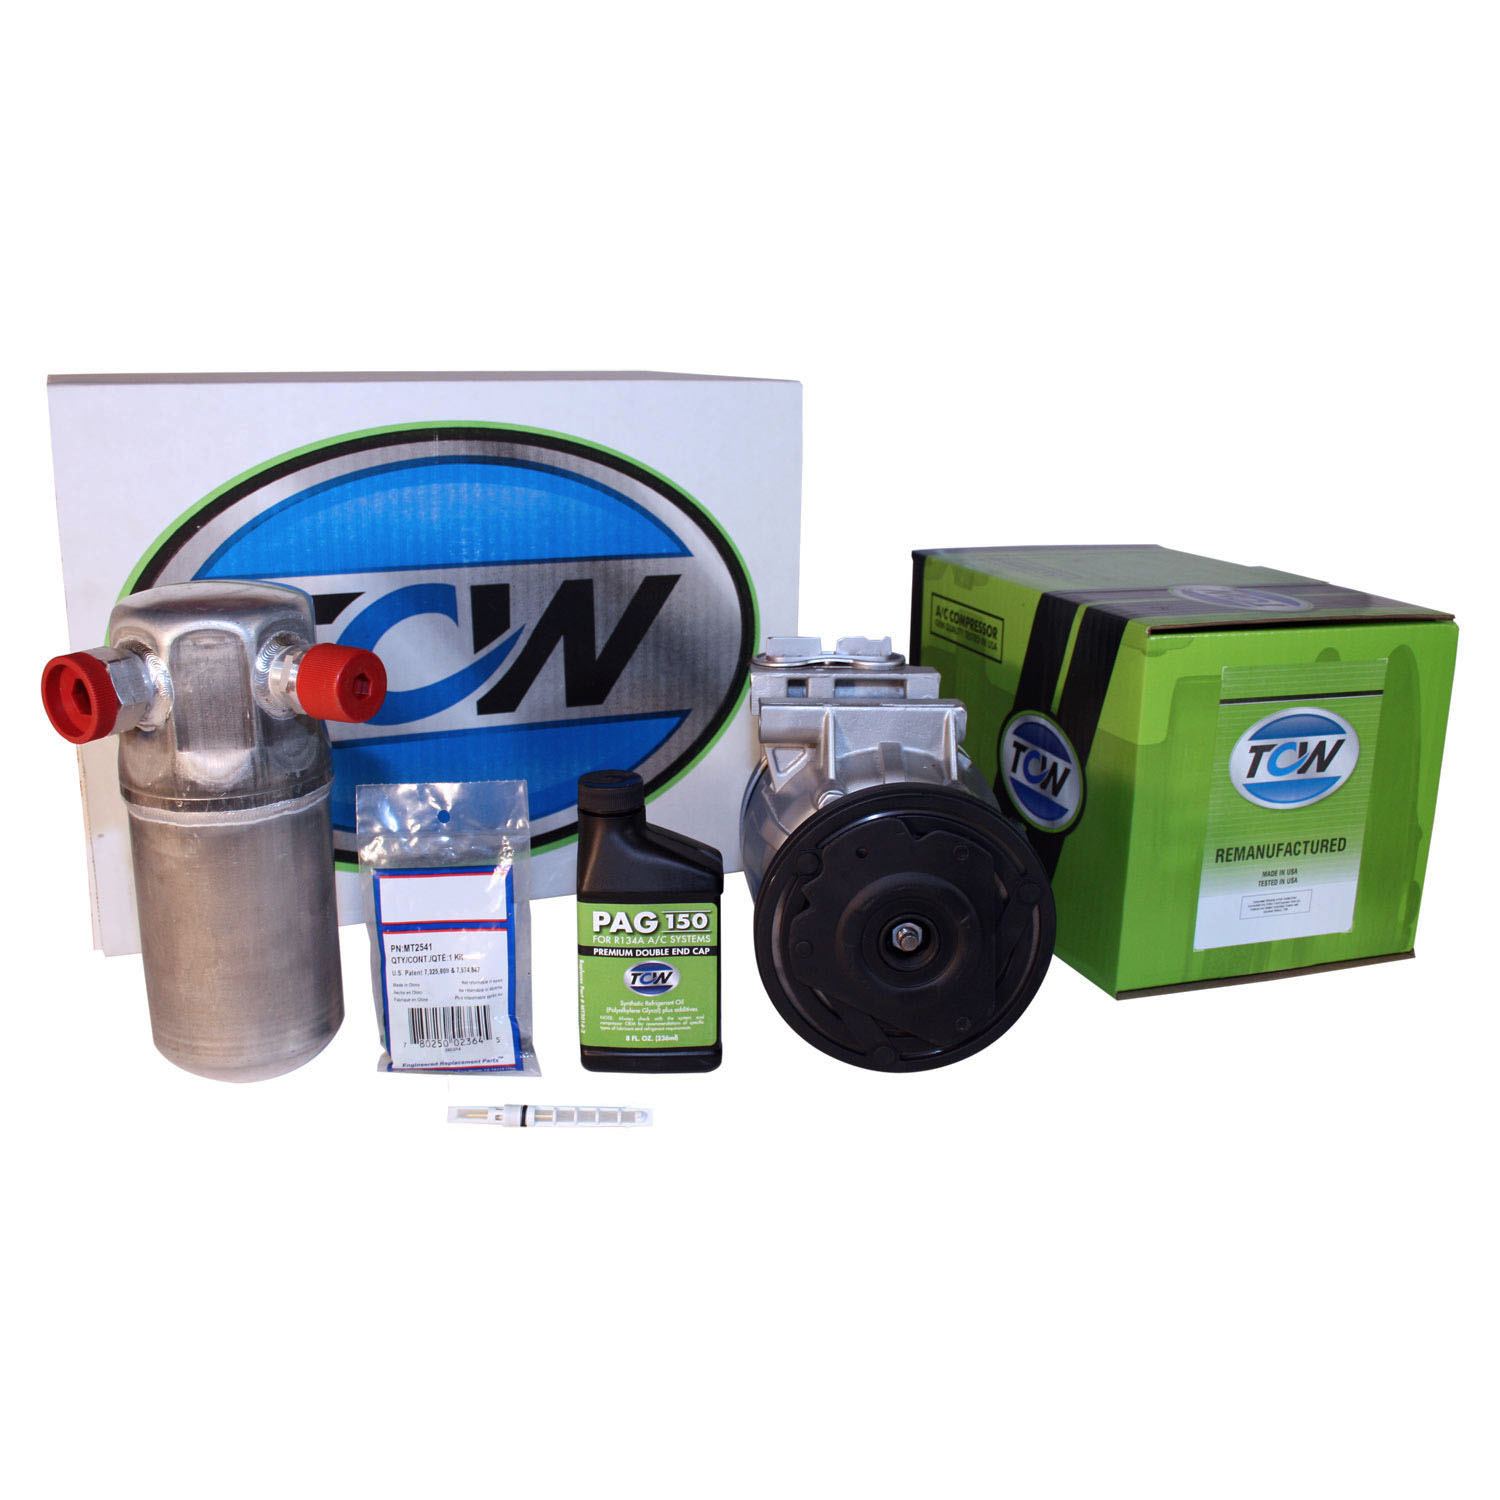 TCW Vehicle A/C Kit K1000345R Remanufactured